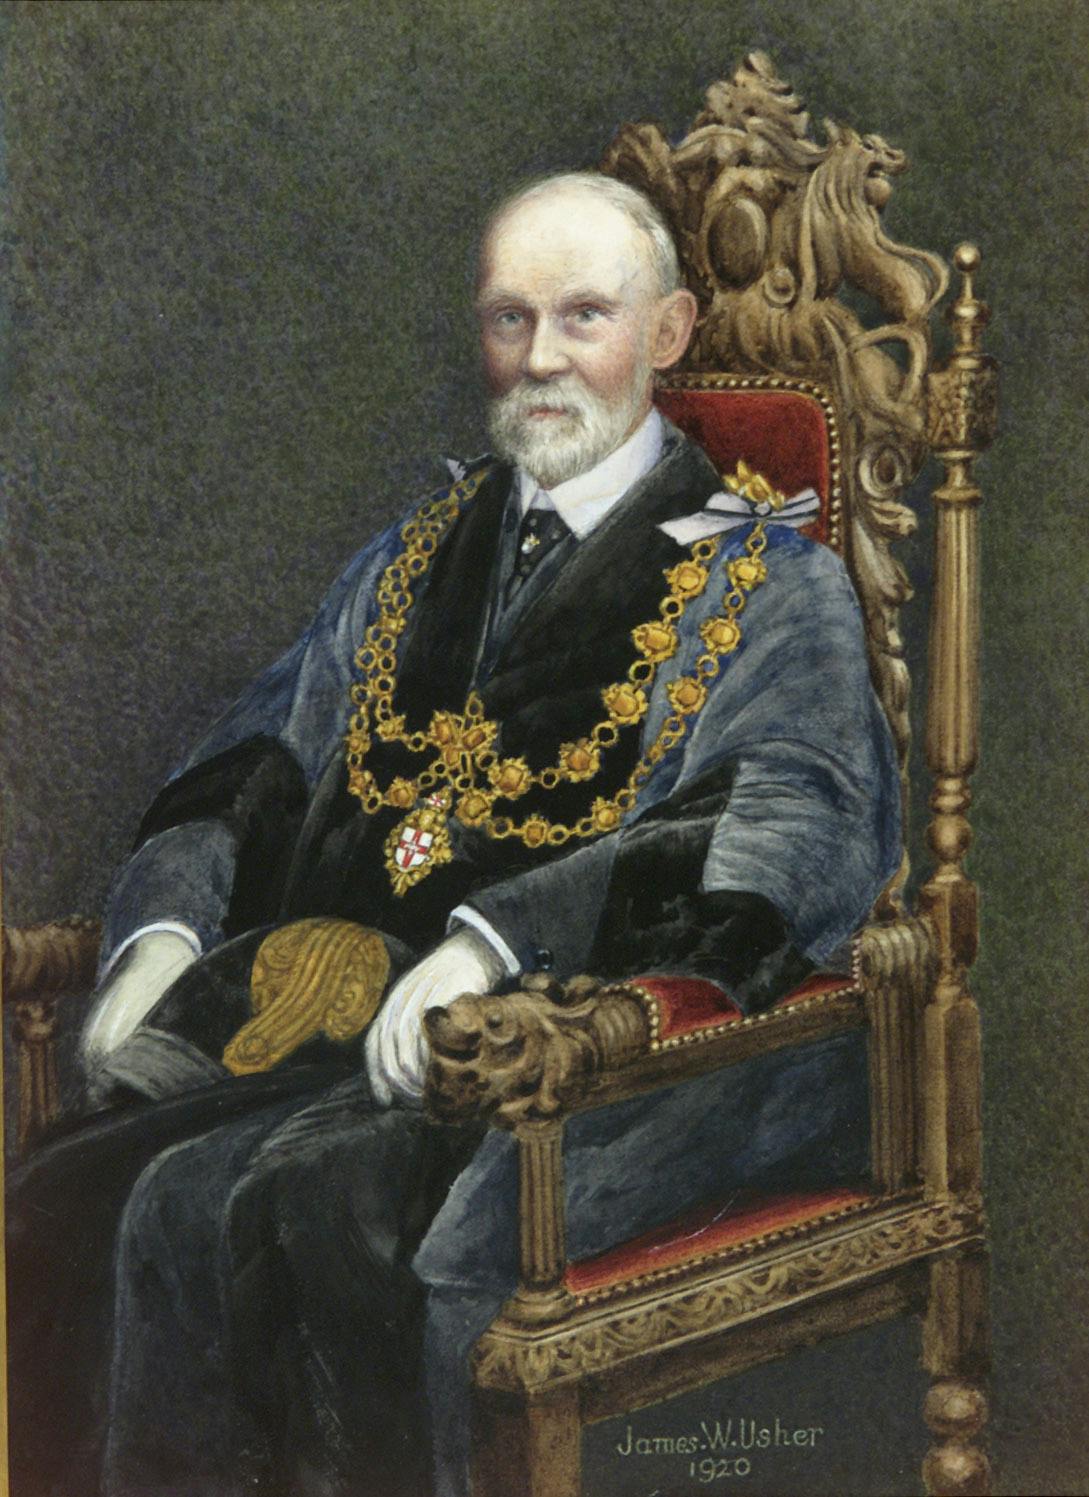 A painting of James Ward Usher